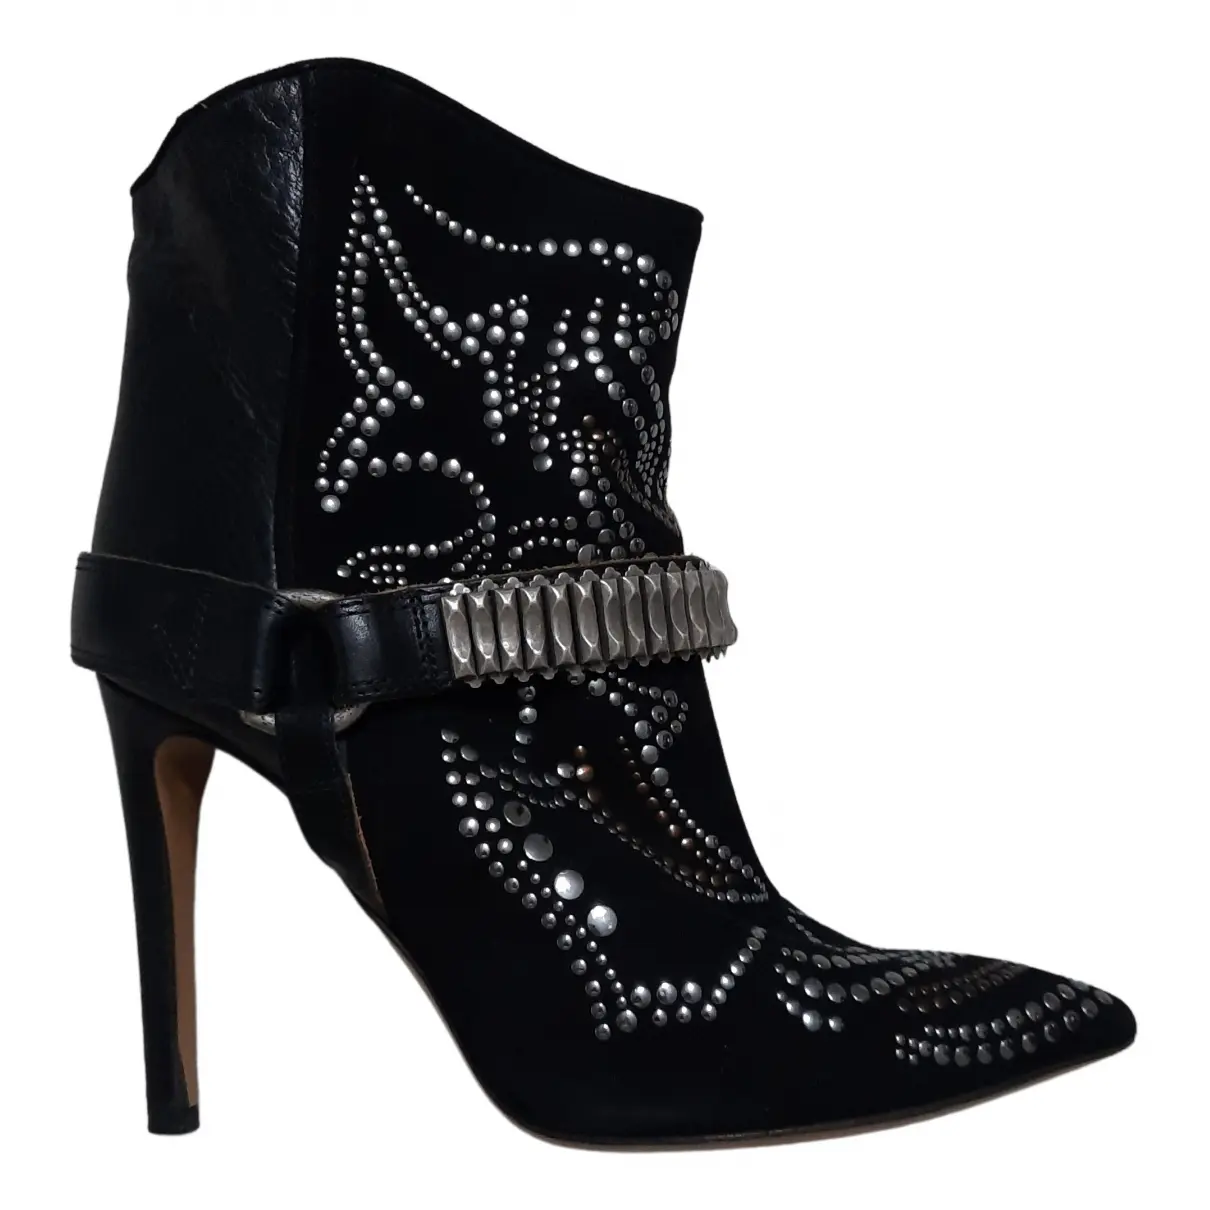 Blackson leather ankle boots Isabel Marant